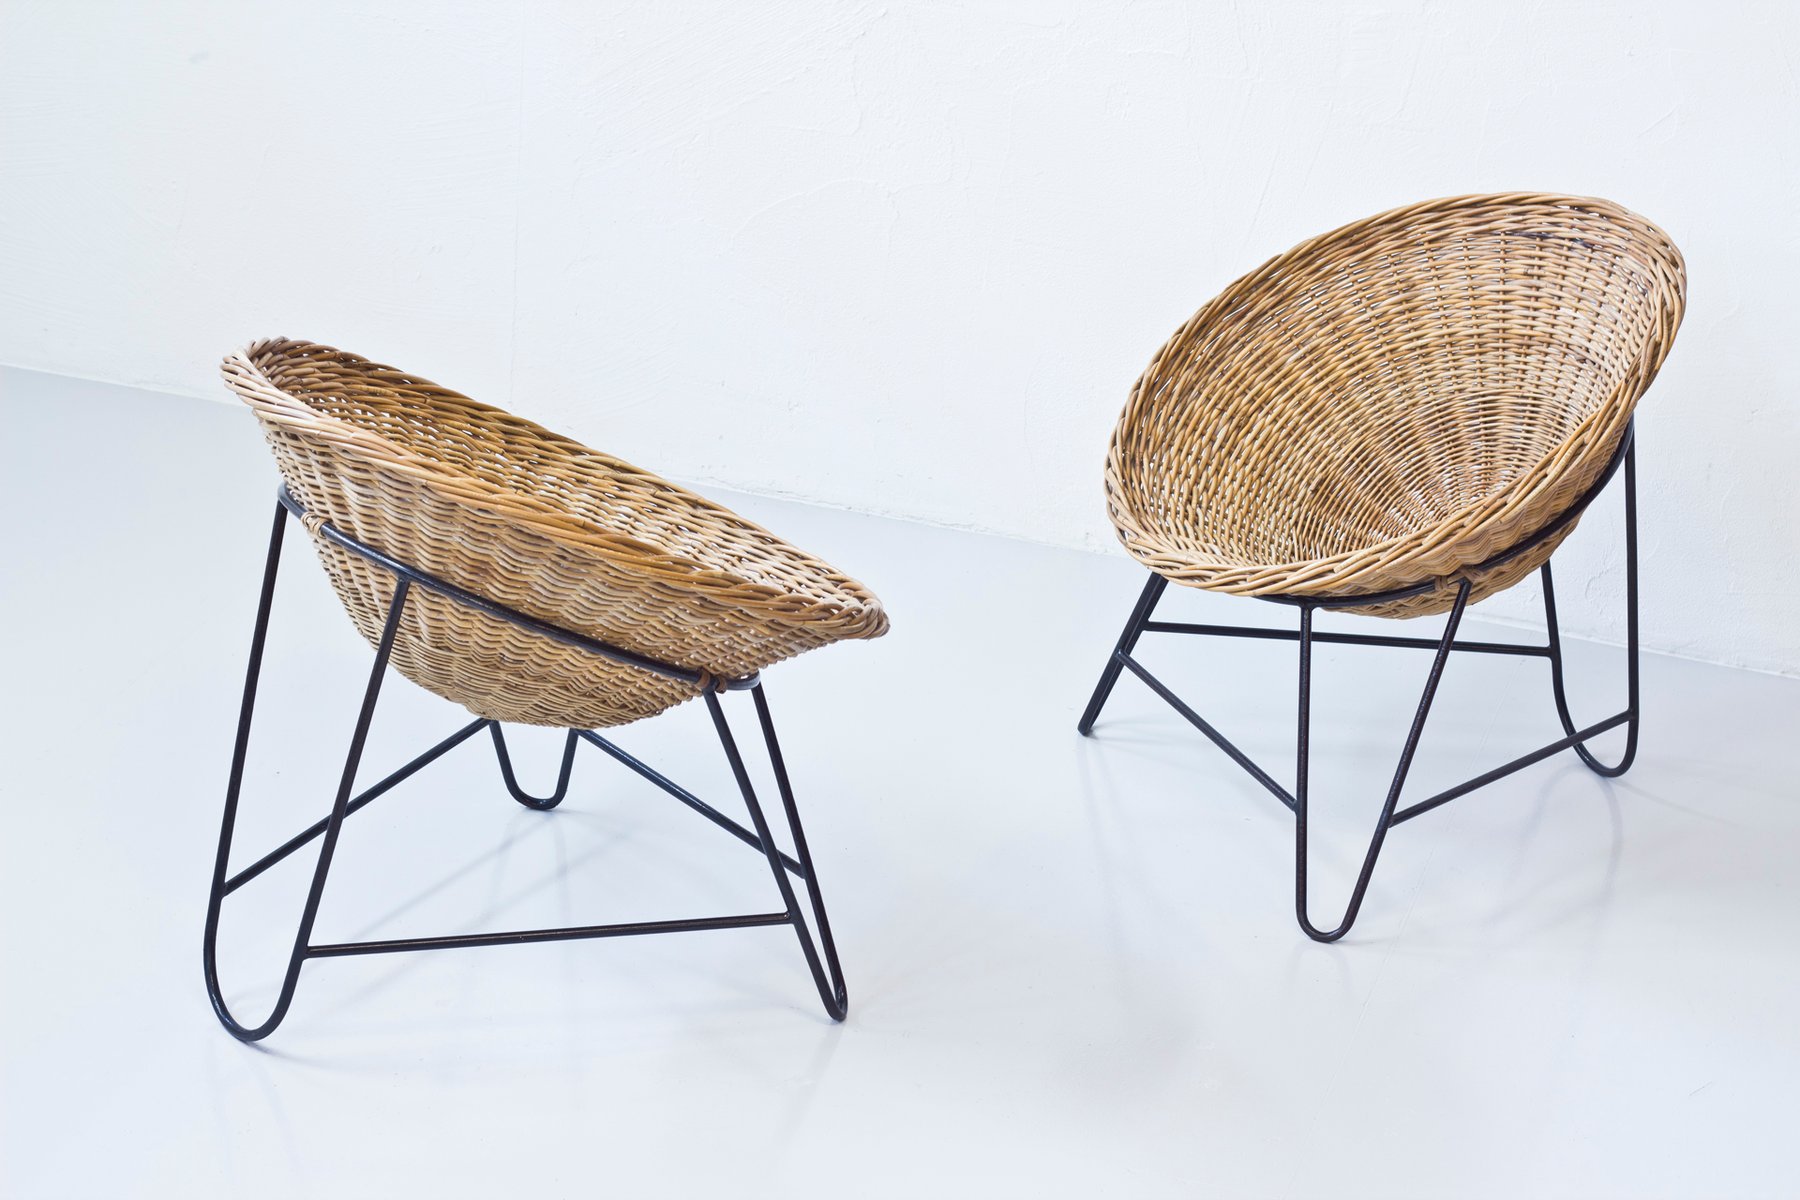 Vintage Rattan Chairs, Set of 2 for sale at Pamono